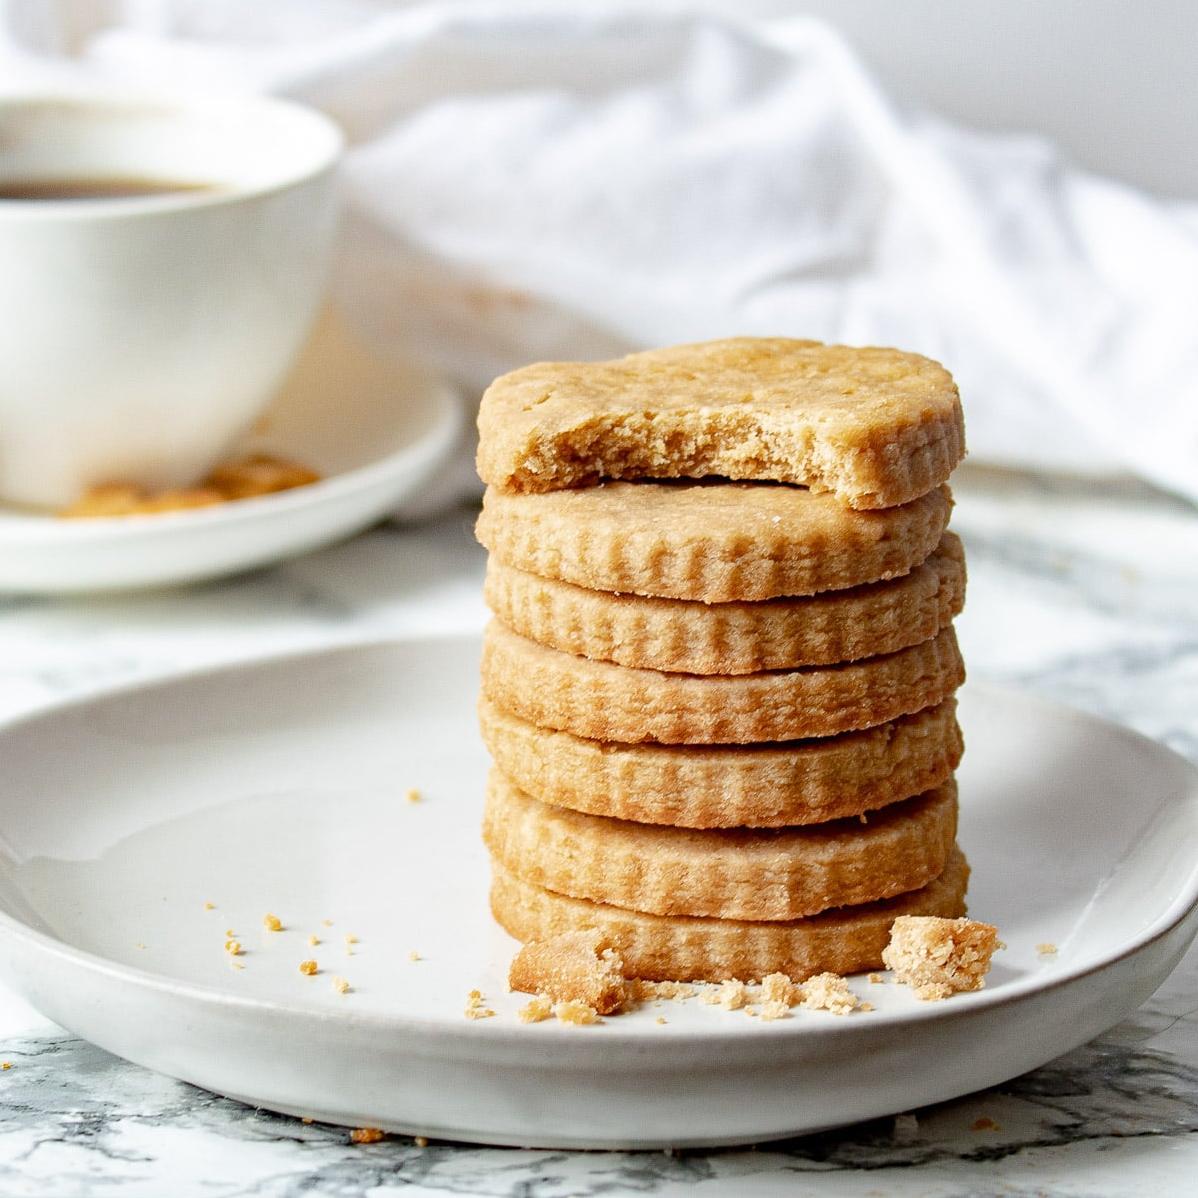  Golden-brown and buttery, the perfect Scottish Shortbread awaits!